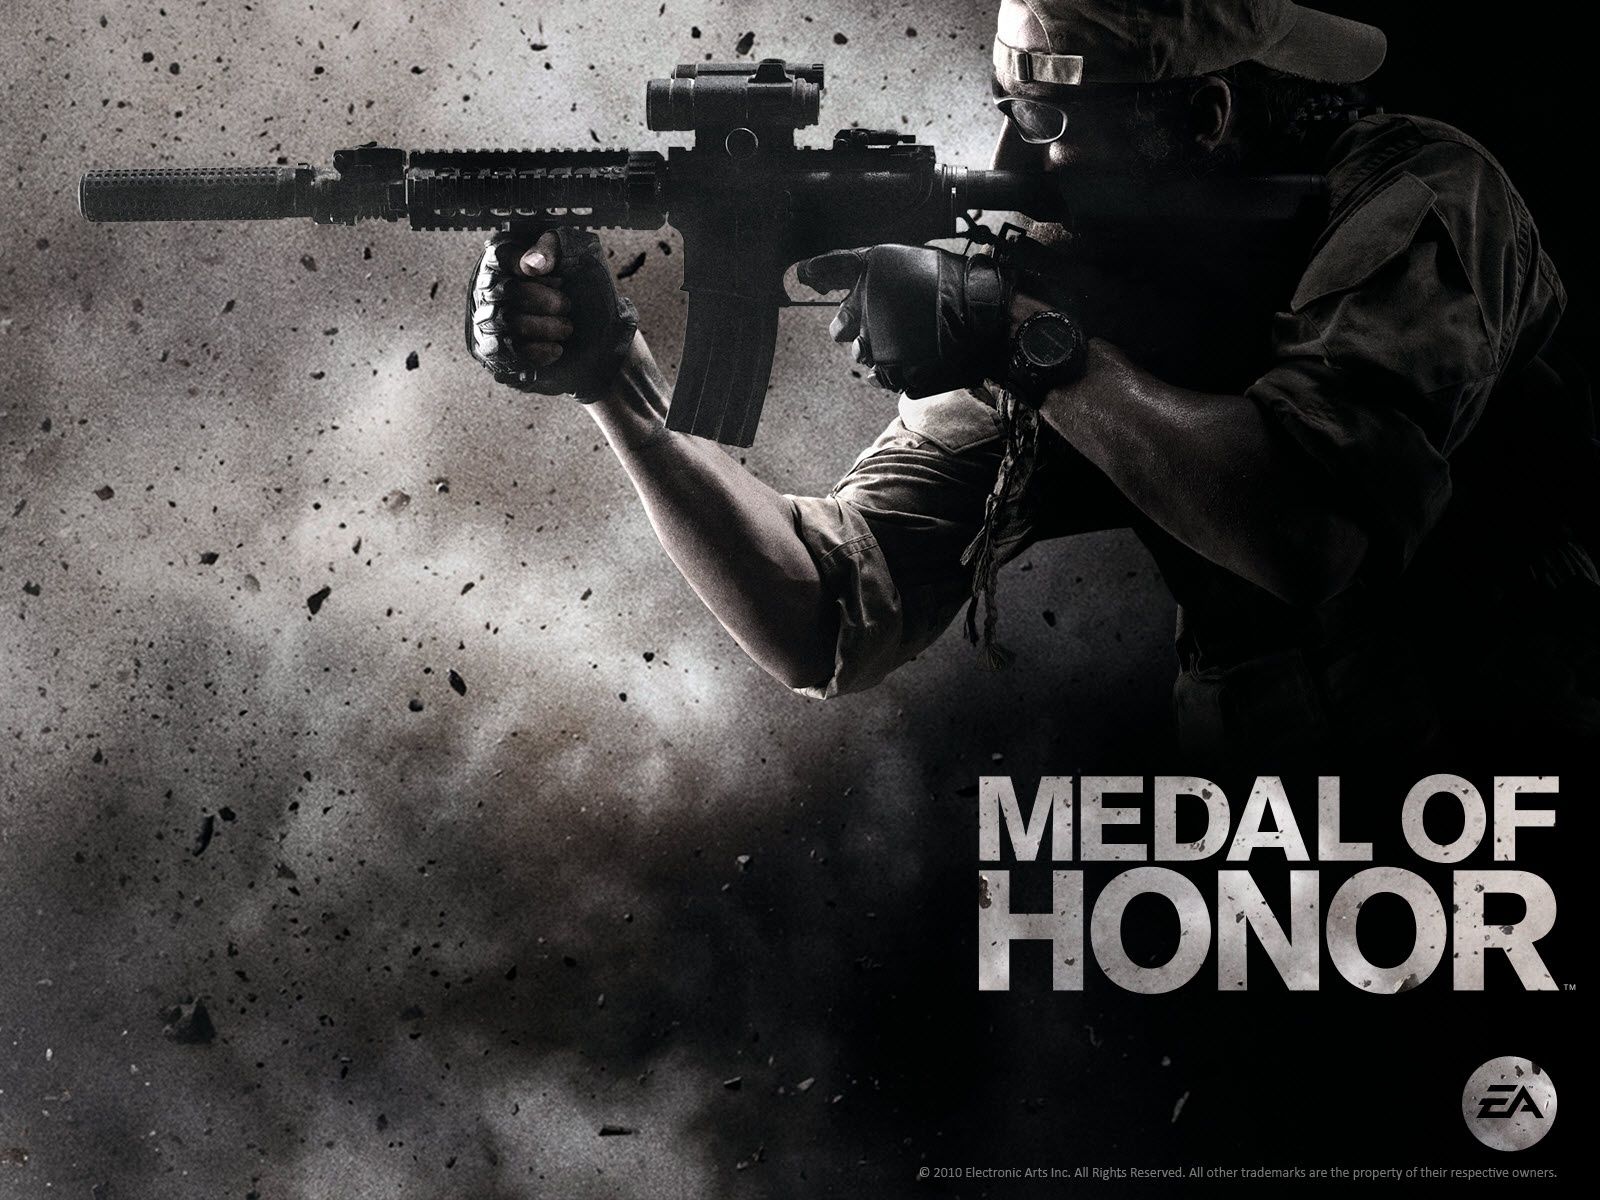 Congressional Medal of Honor Wallpaper. Medal of Honor Warfighter Wallpaper, Medal of Honor Wallpaper and Congressional Medal of Honor Wallpaper